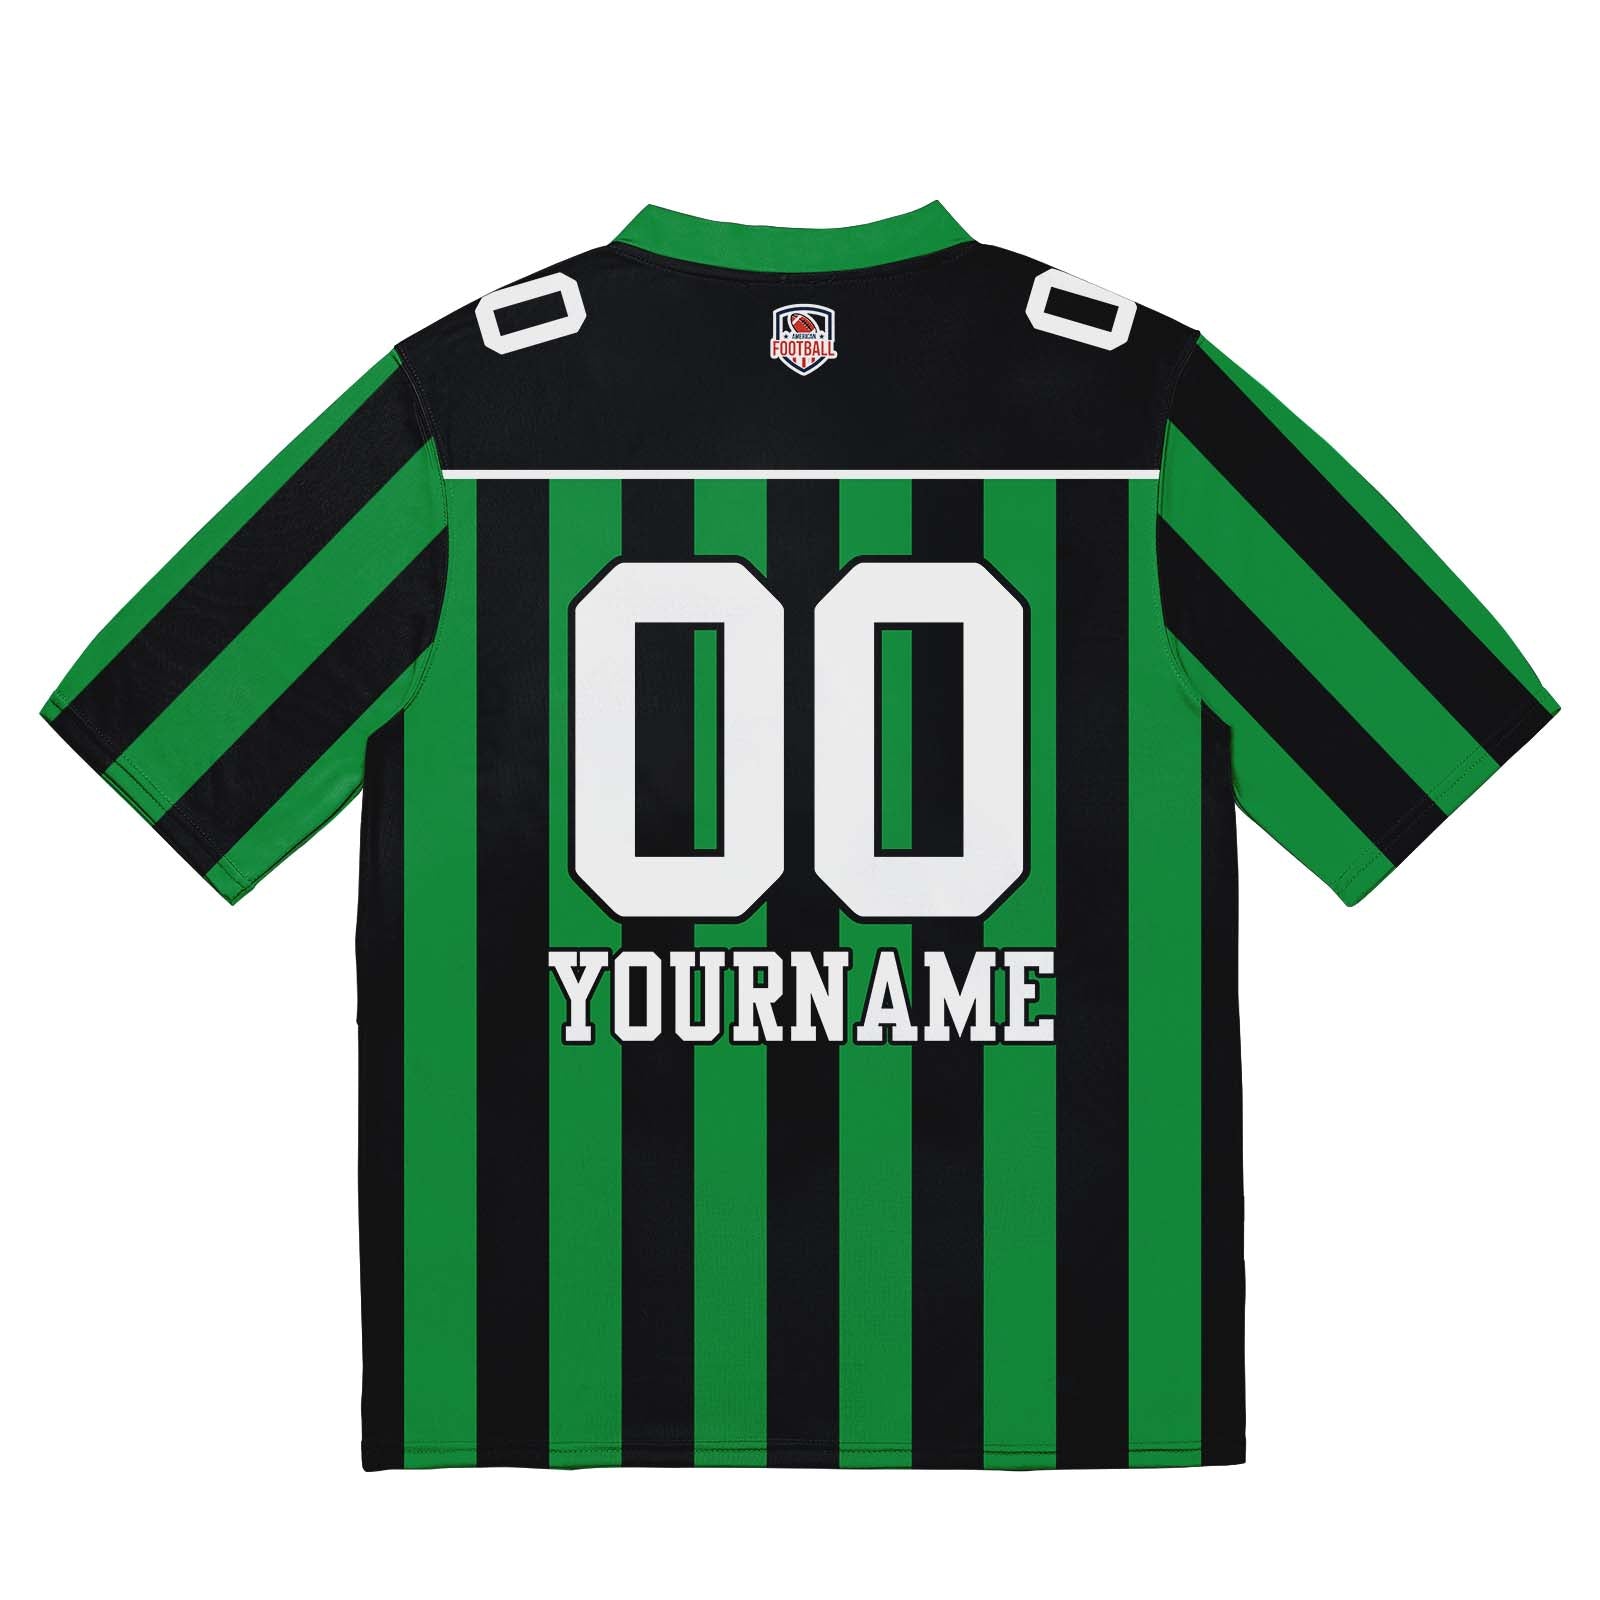 Custom Football Jersey Shirt Personalized Stitched Printed Team Name Number Green & Black